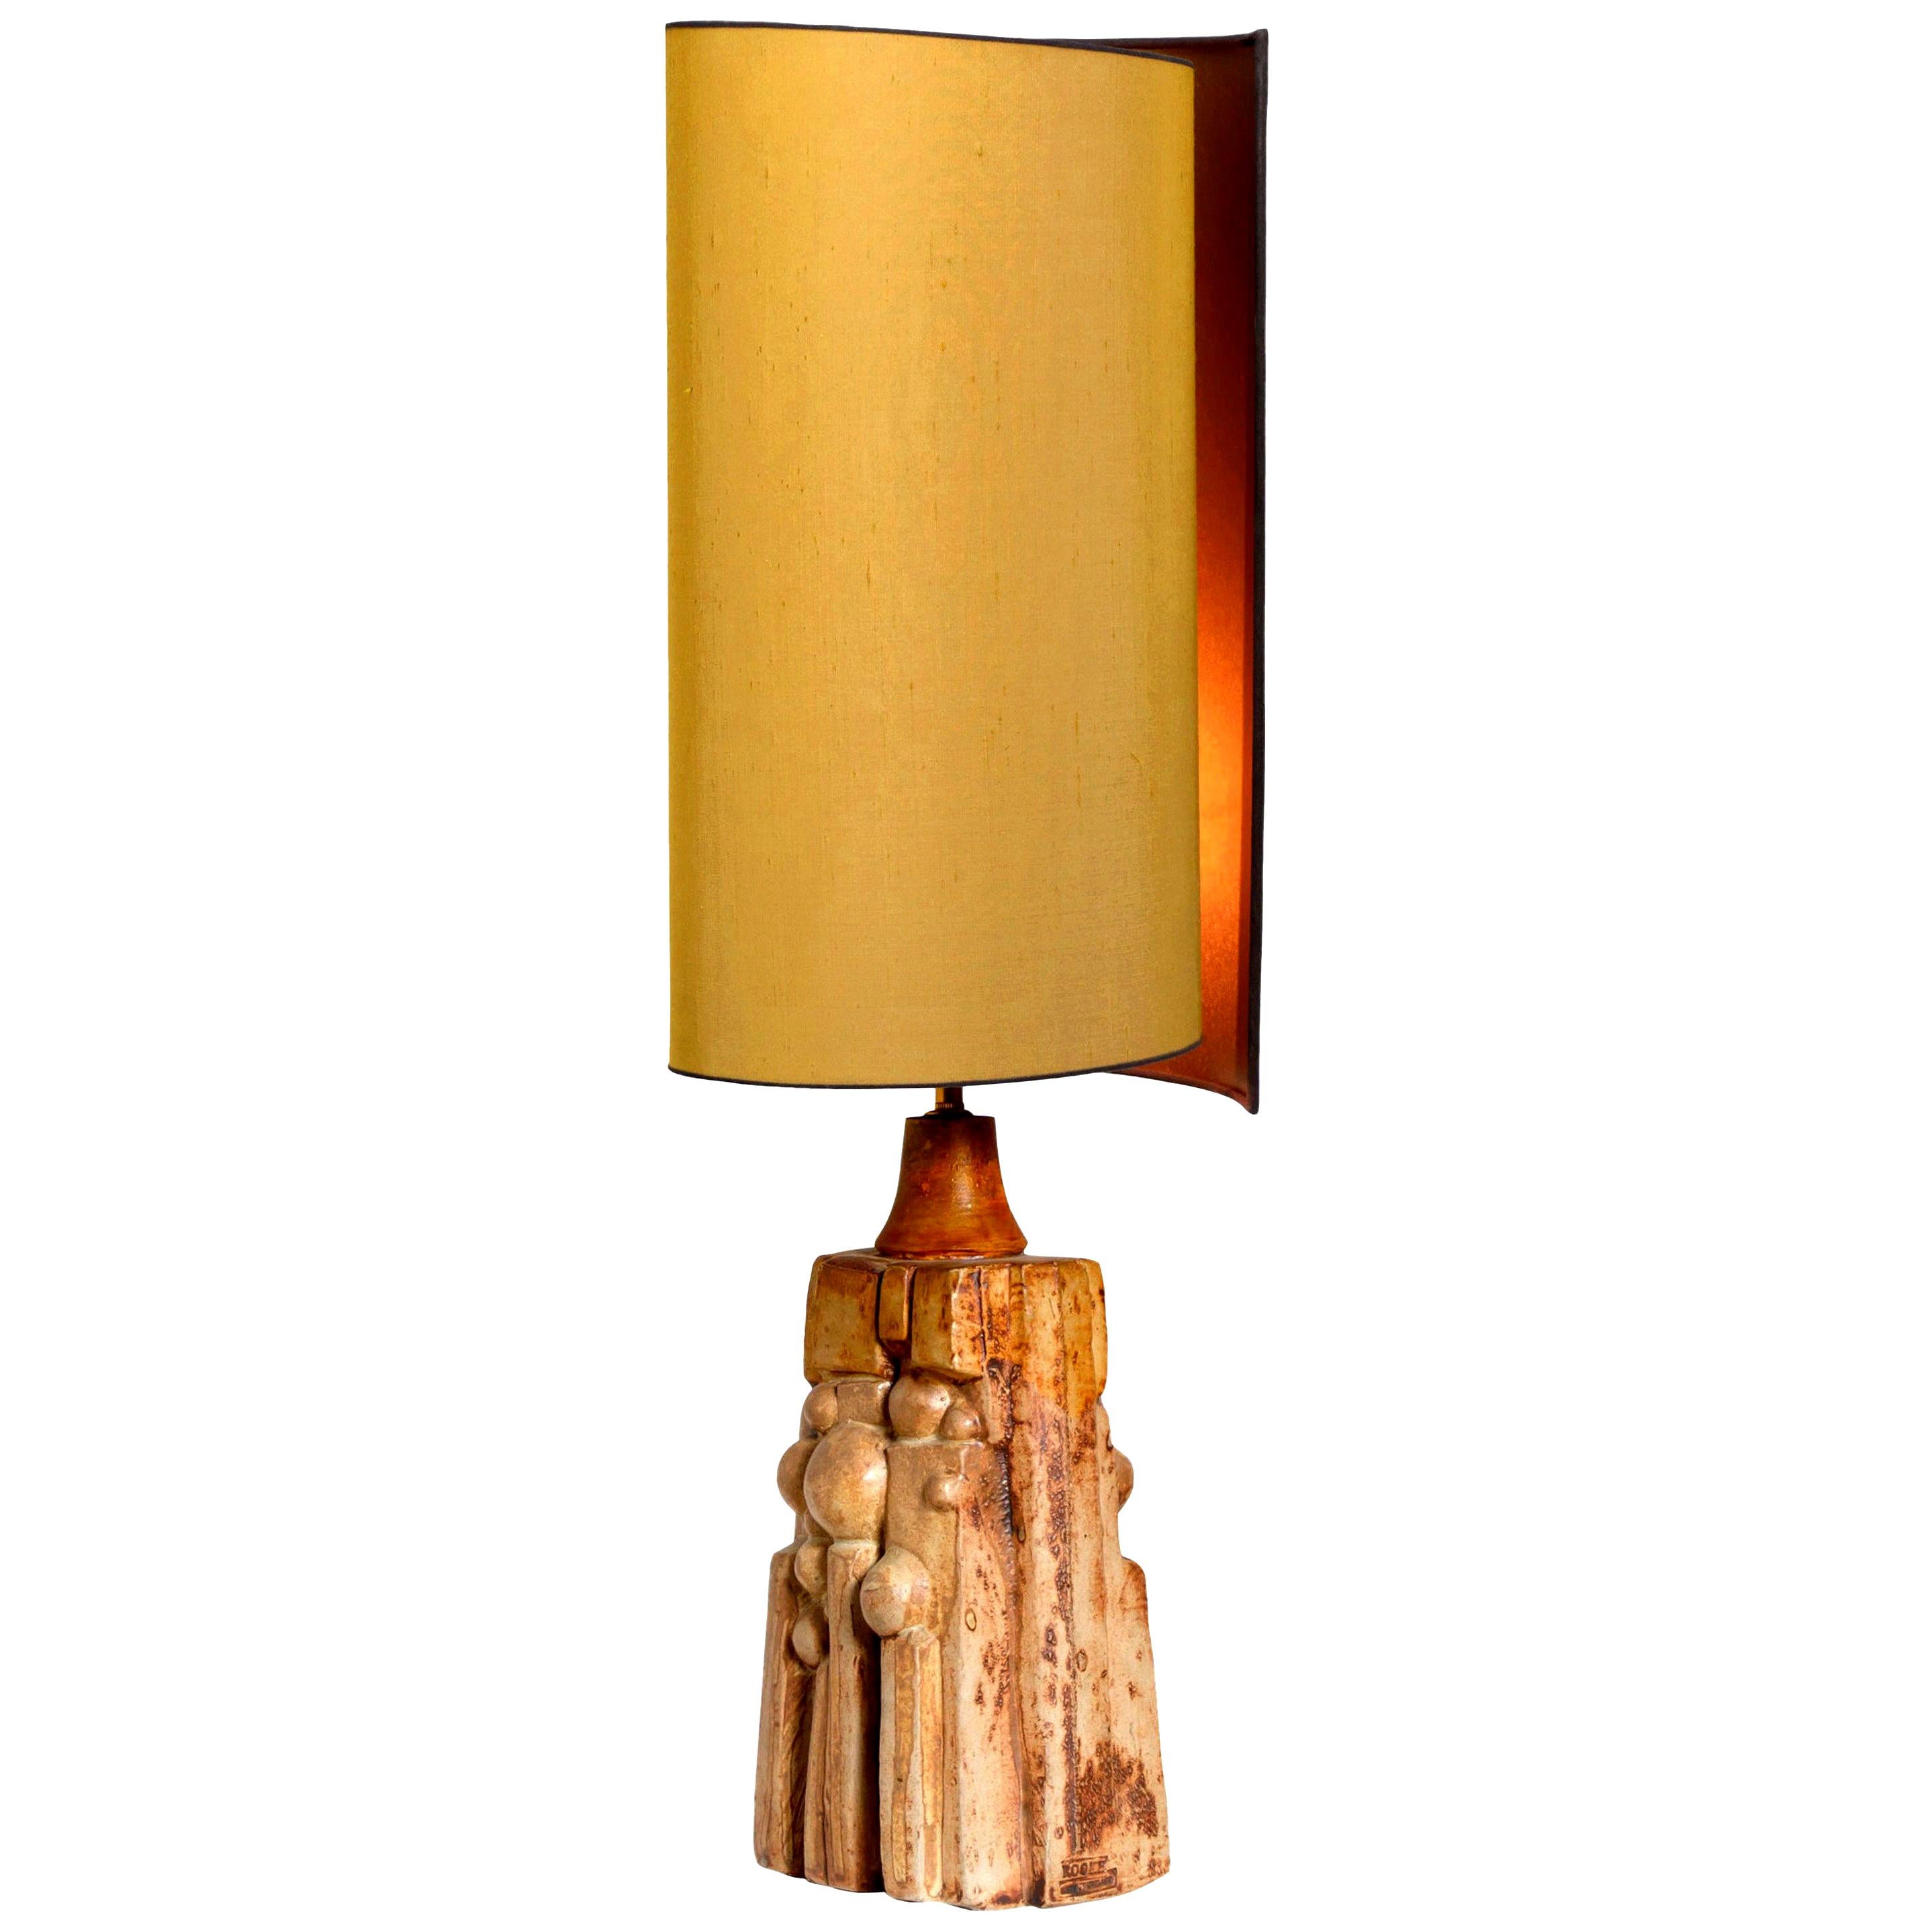 B. Rooke Ceramic Lamp with New Custom Made Silk Lampshade by René Houben, 1960s